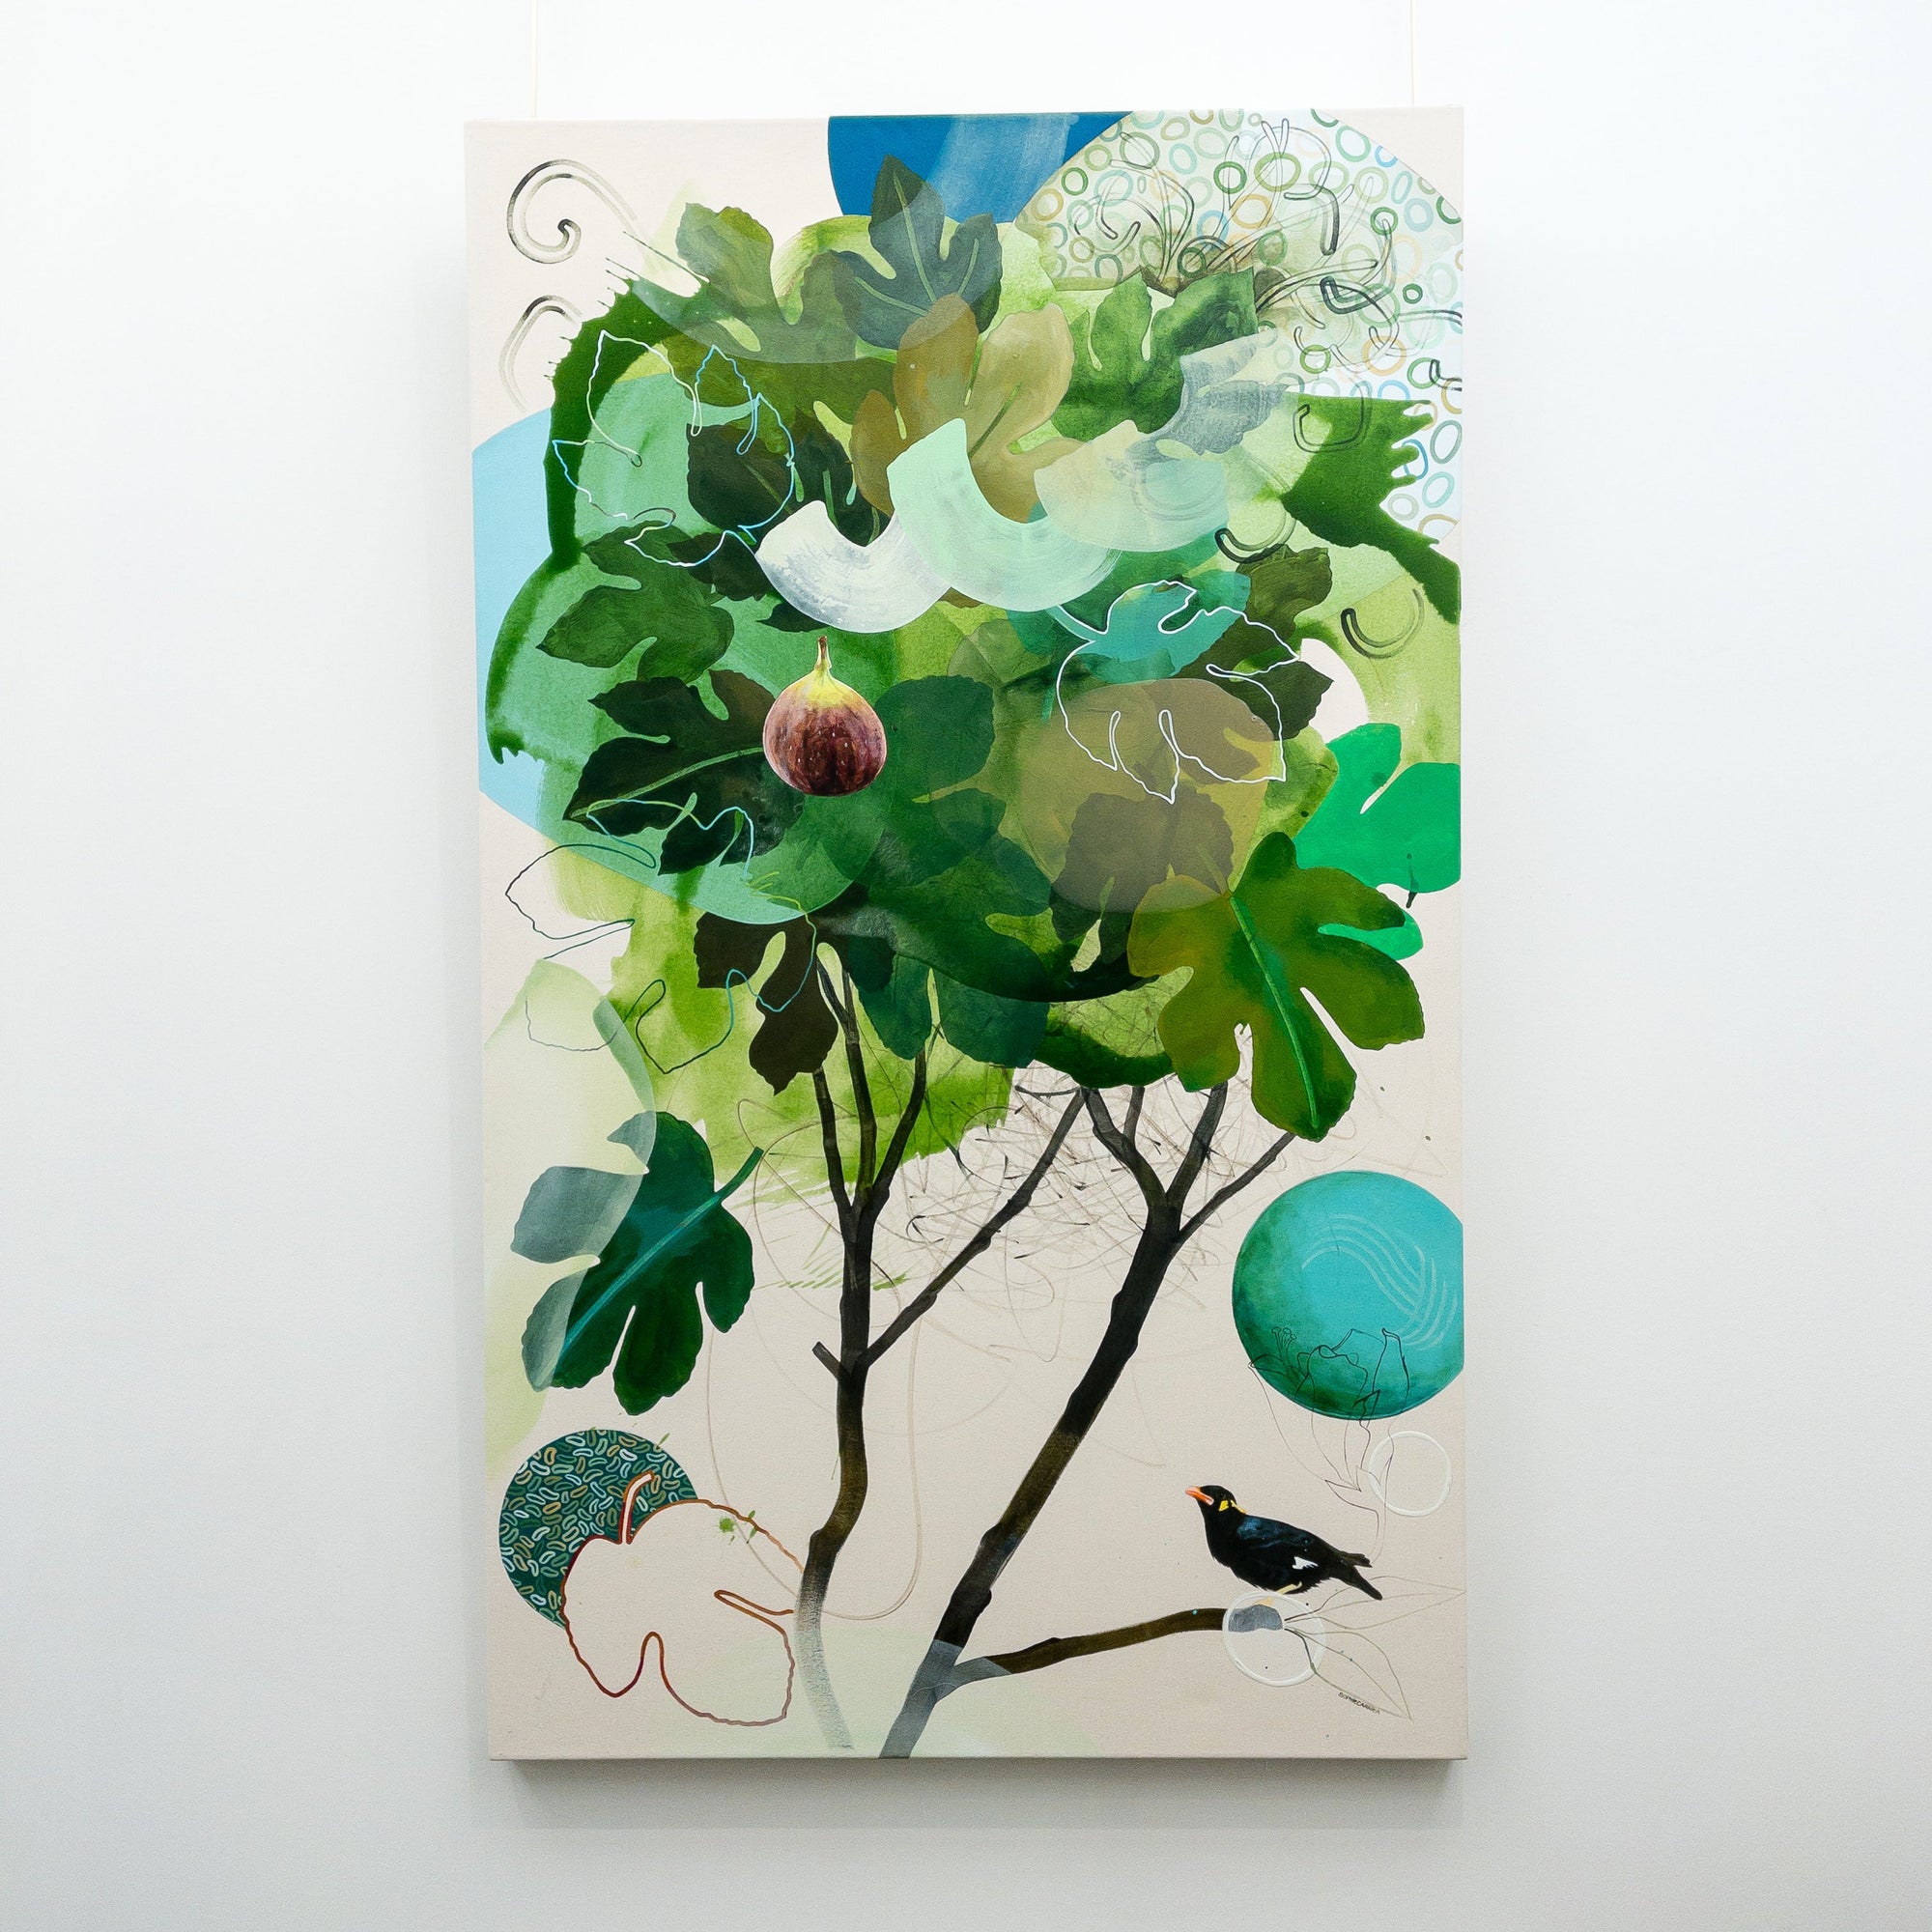 Sophie Carrier Fig Tree | 60" x 36" Mixed Media on canvas